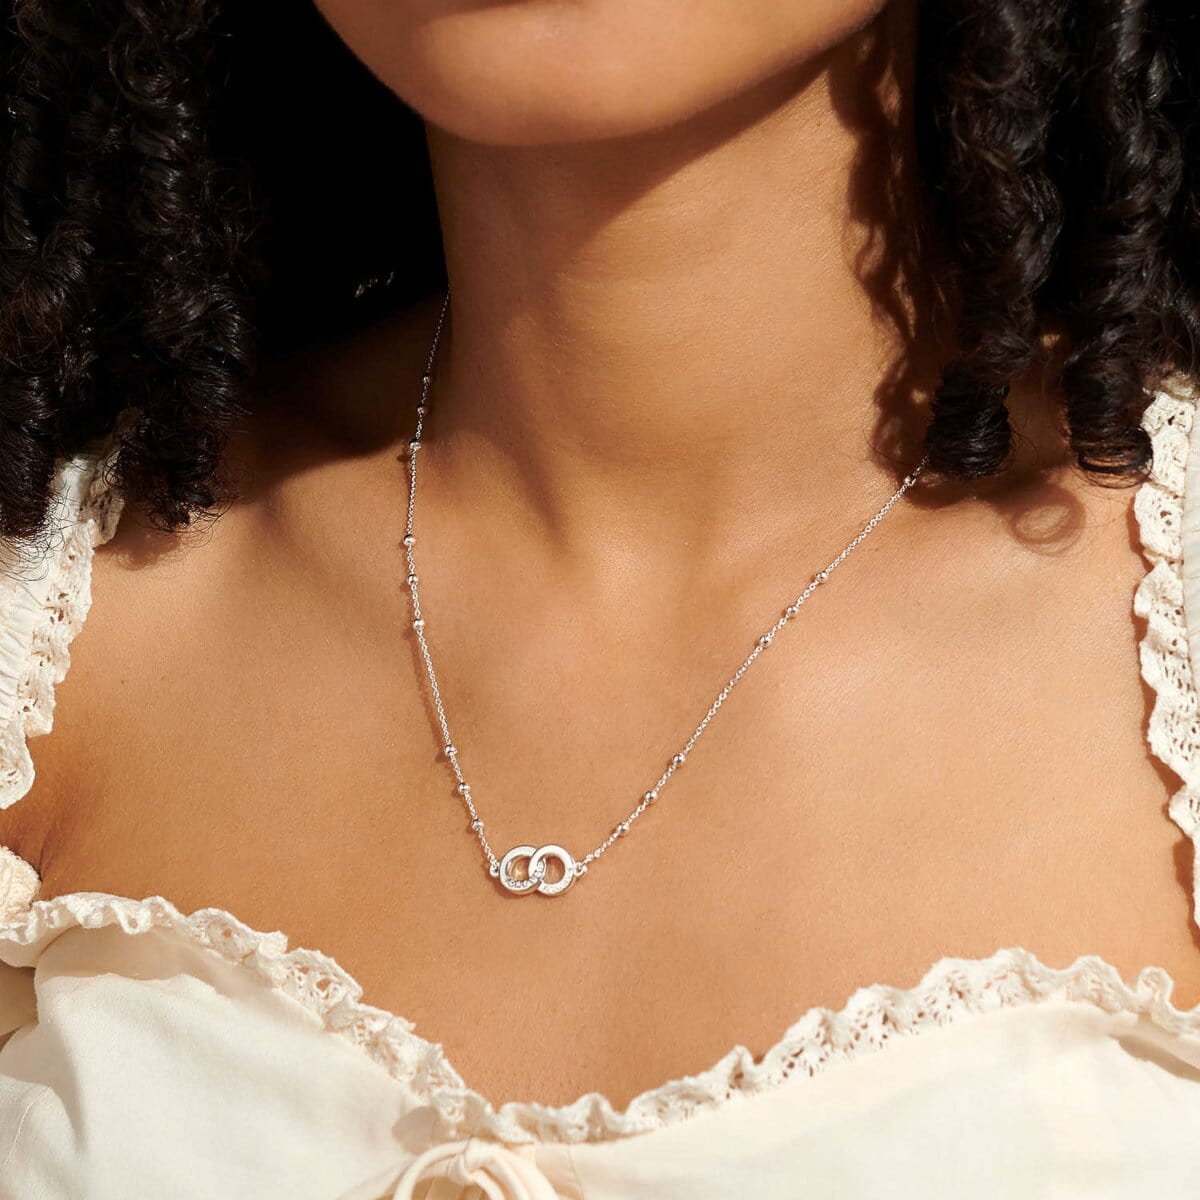 Joma Jewellery Necklaces Joma Jewellery Forever Yours Necklace - You Are My Forever And Always